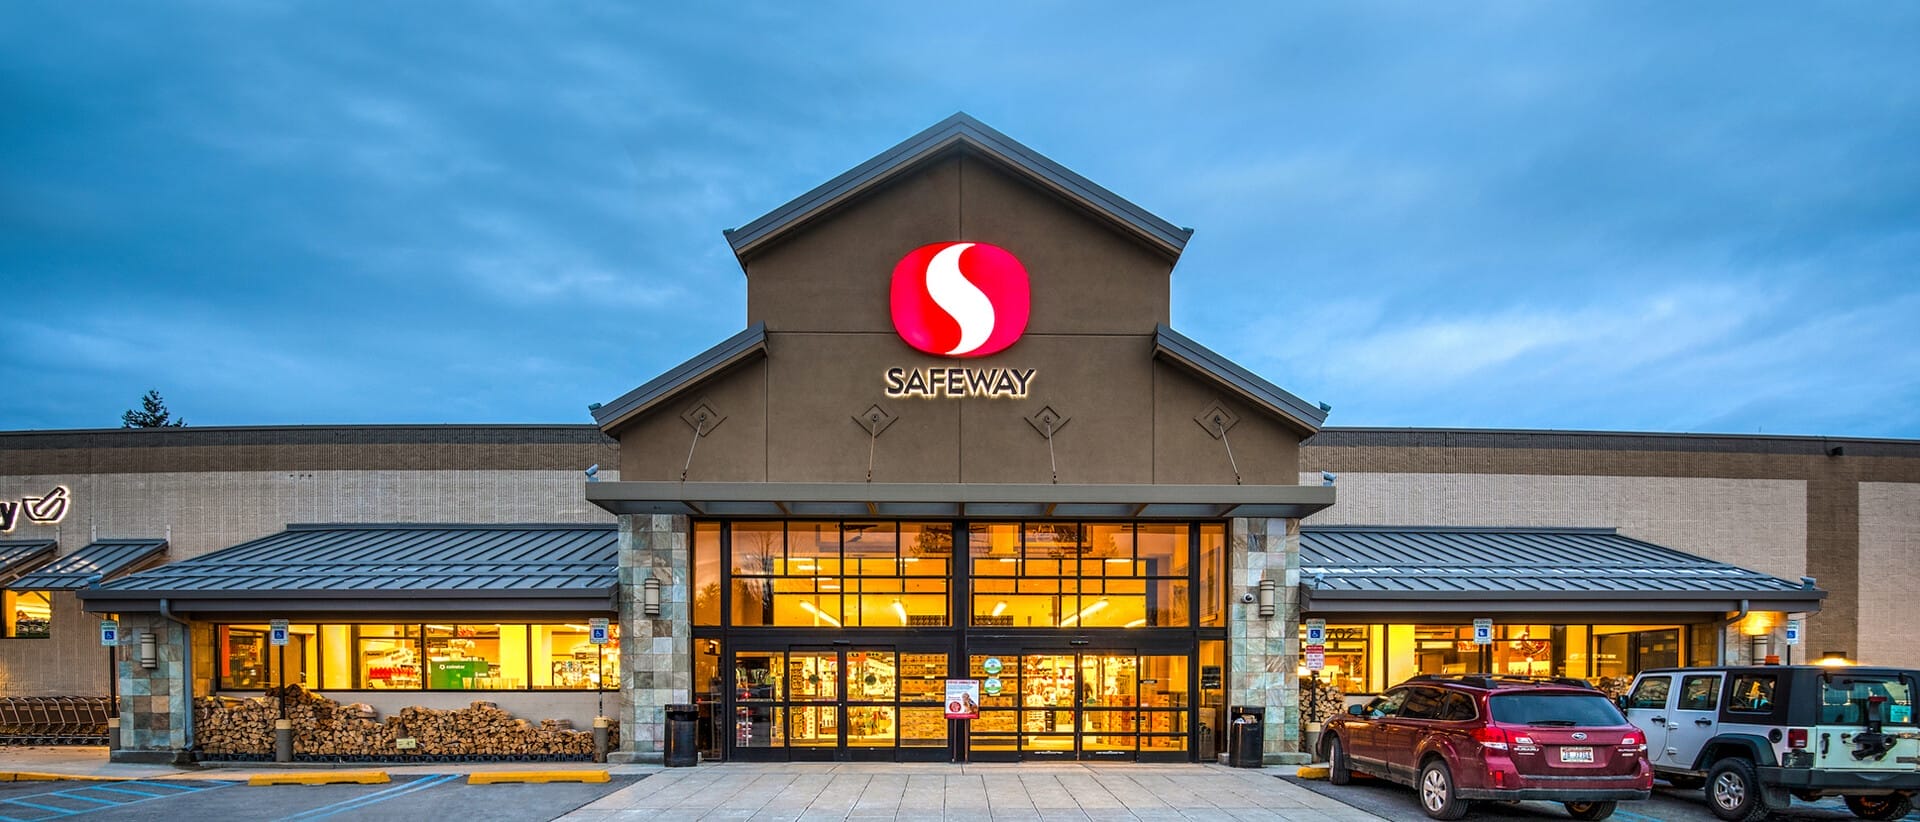 Exterior view of a Safeway grocery store at twilight with illuminated storefront and parked cars in front, representing single tenant net leased investments nationwide.